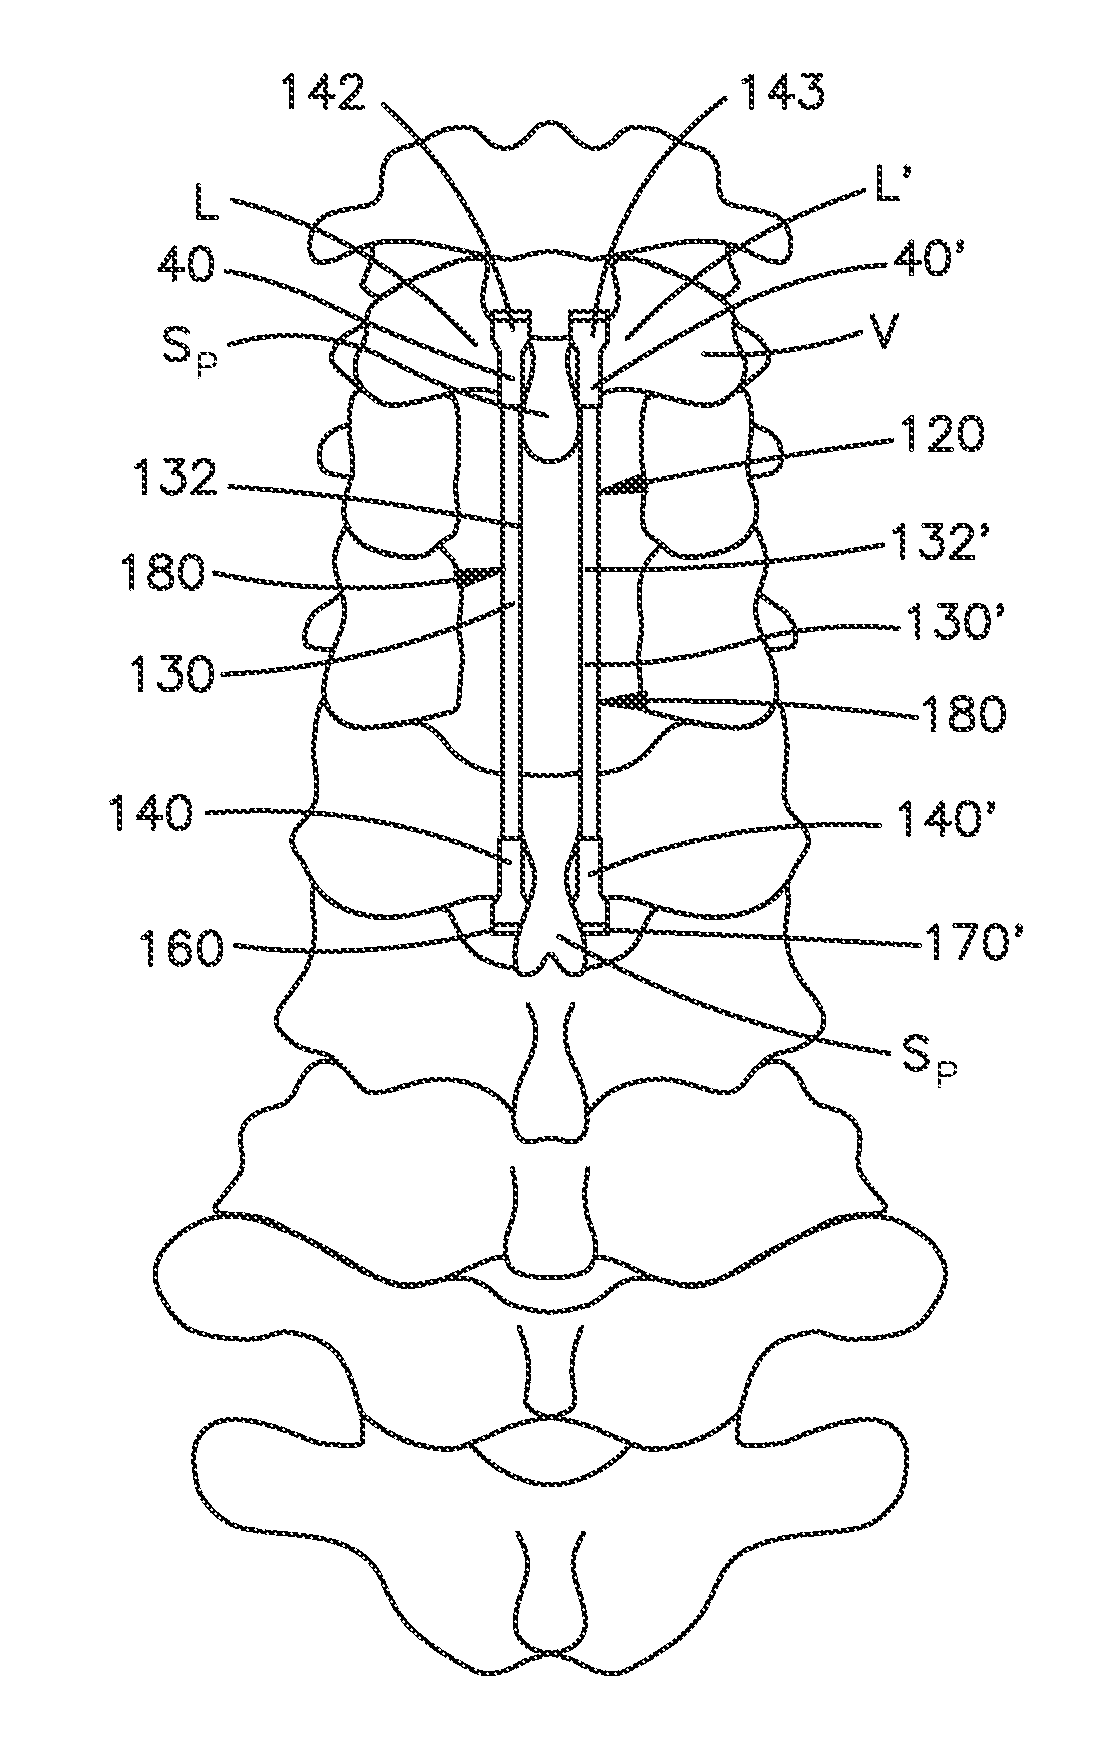 Spine stabilization system and method